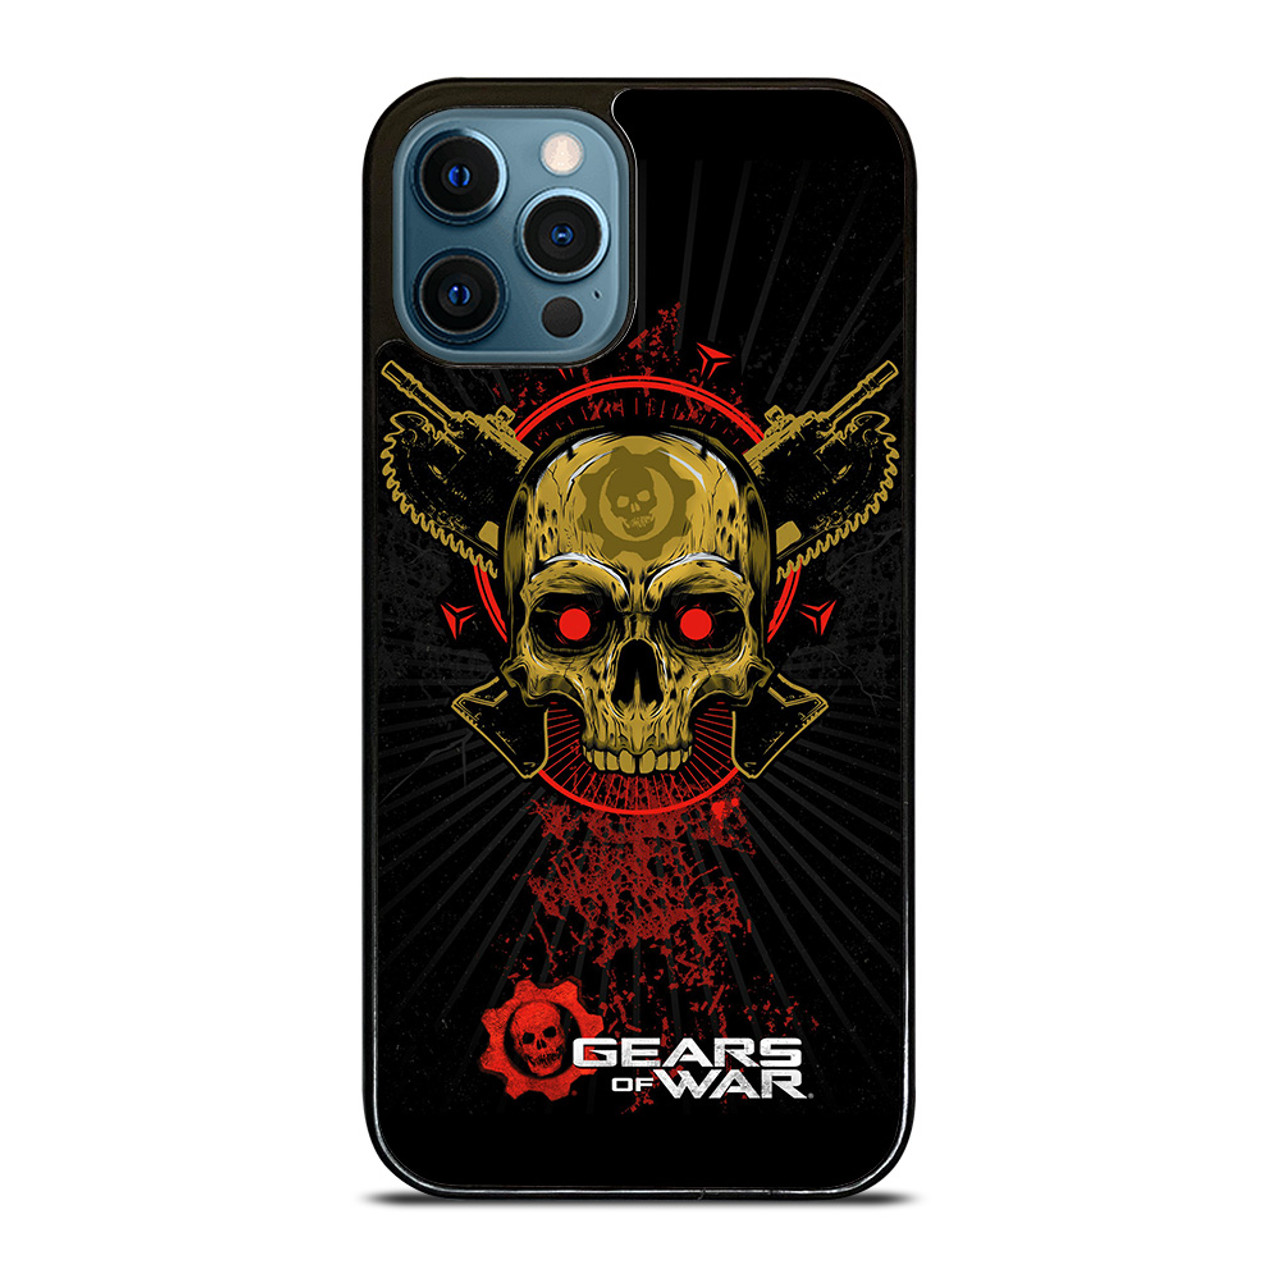 GEARS OF WAR LOGO iPhone 12 Pro Case Cover